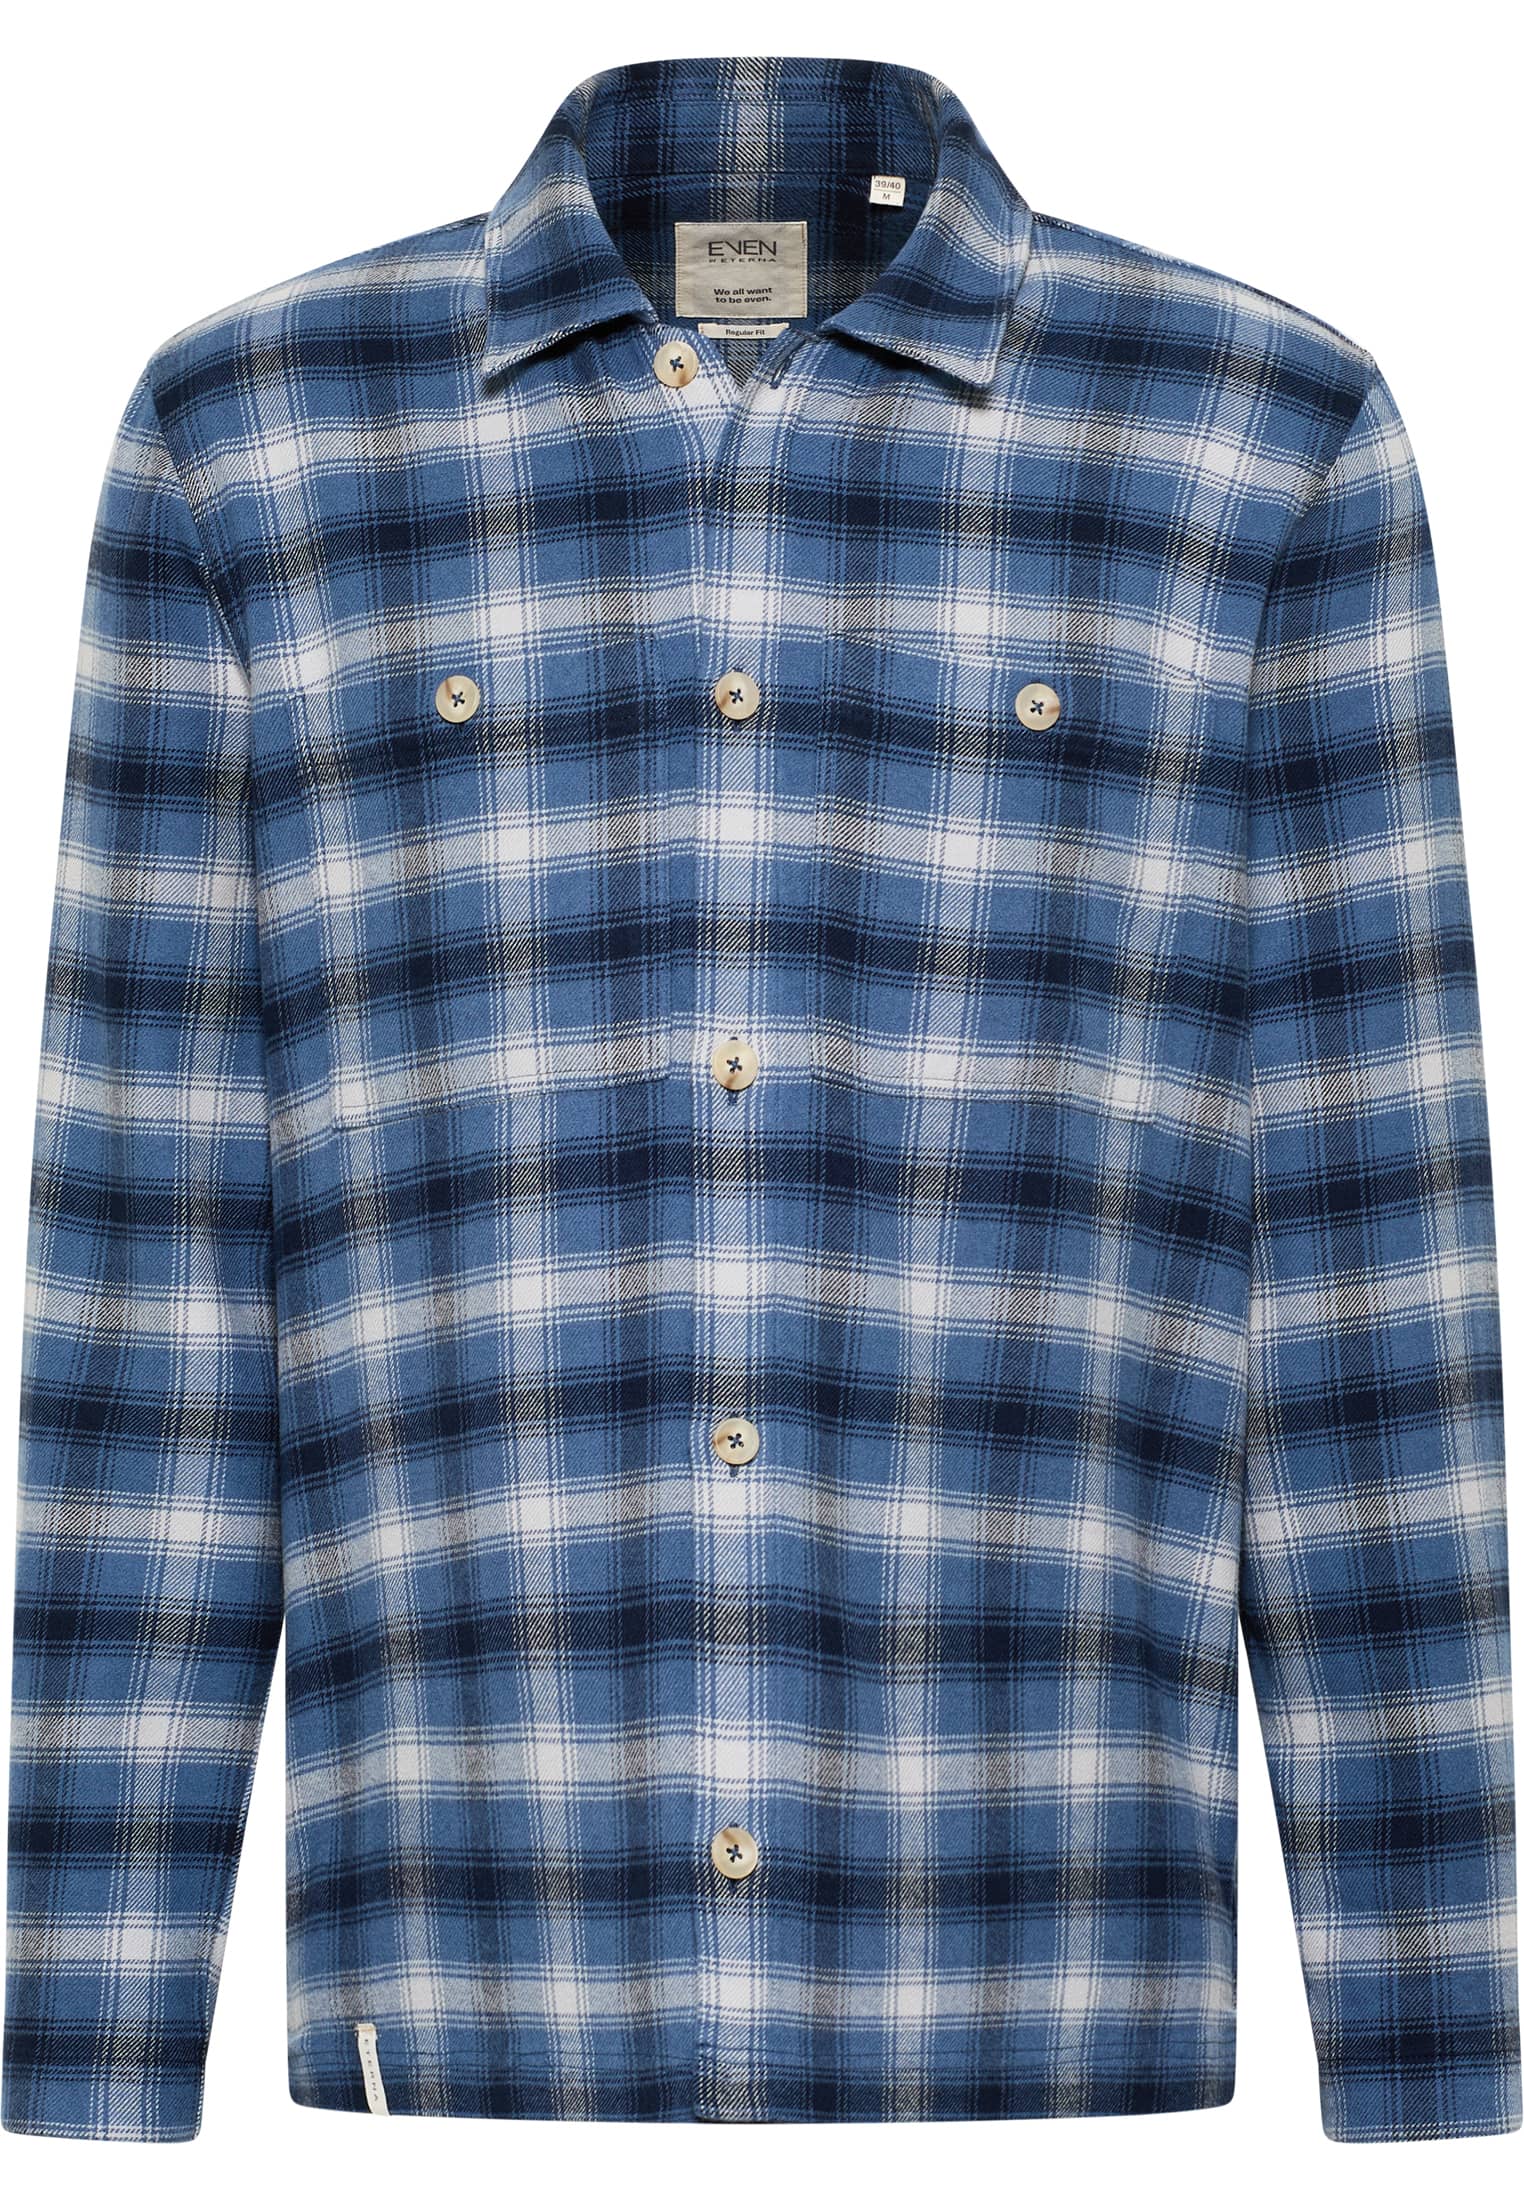 MODERN FIT Shirt in blue-gray checkered